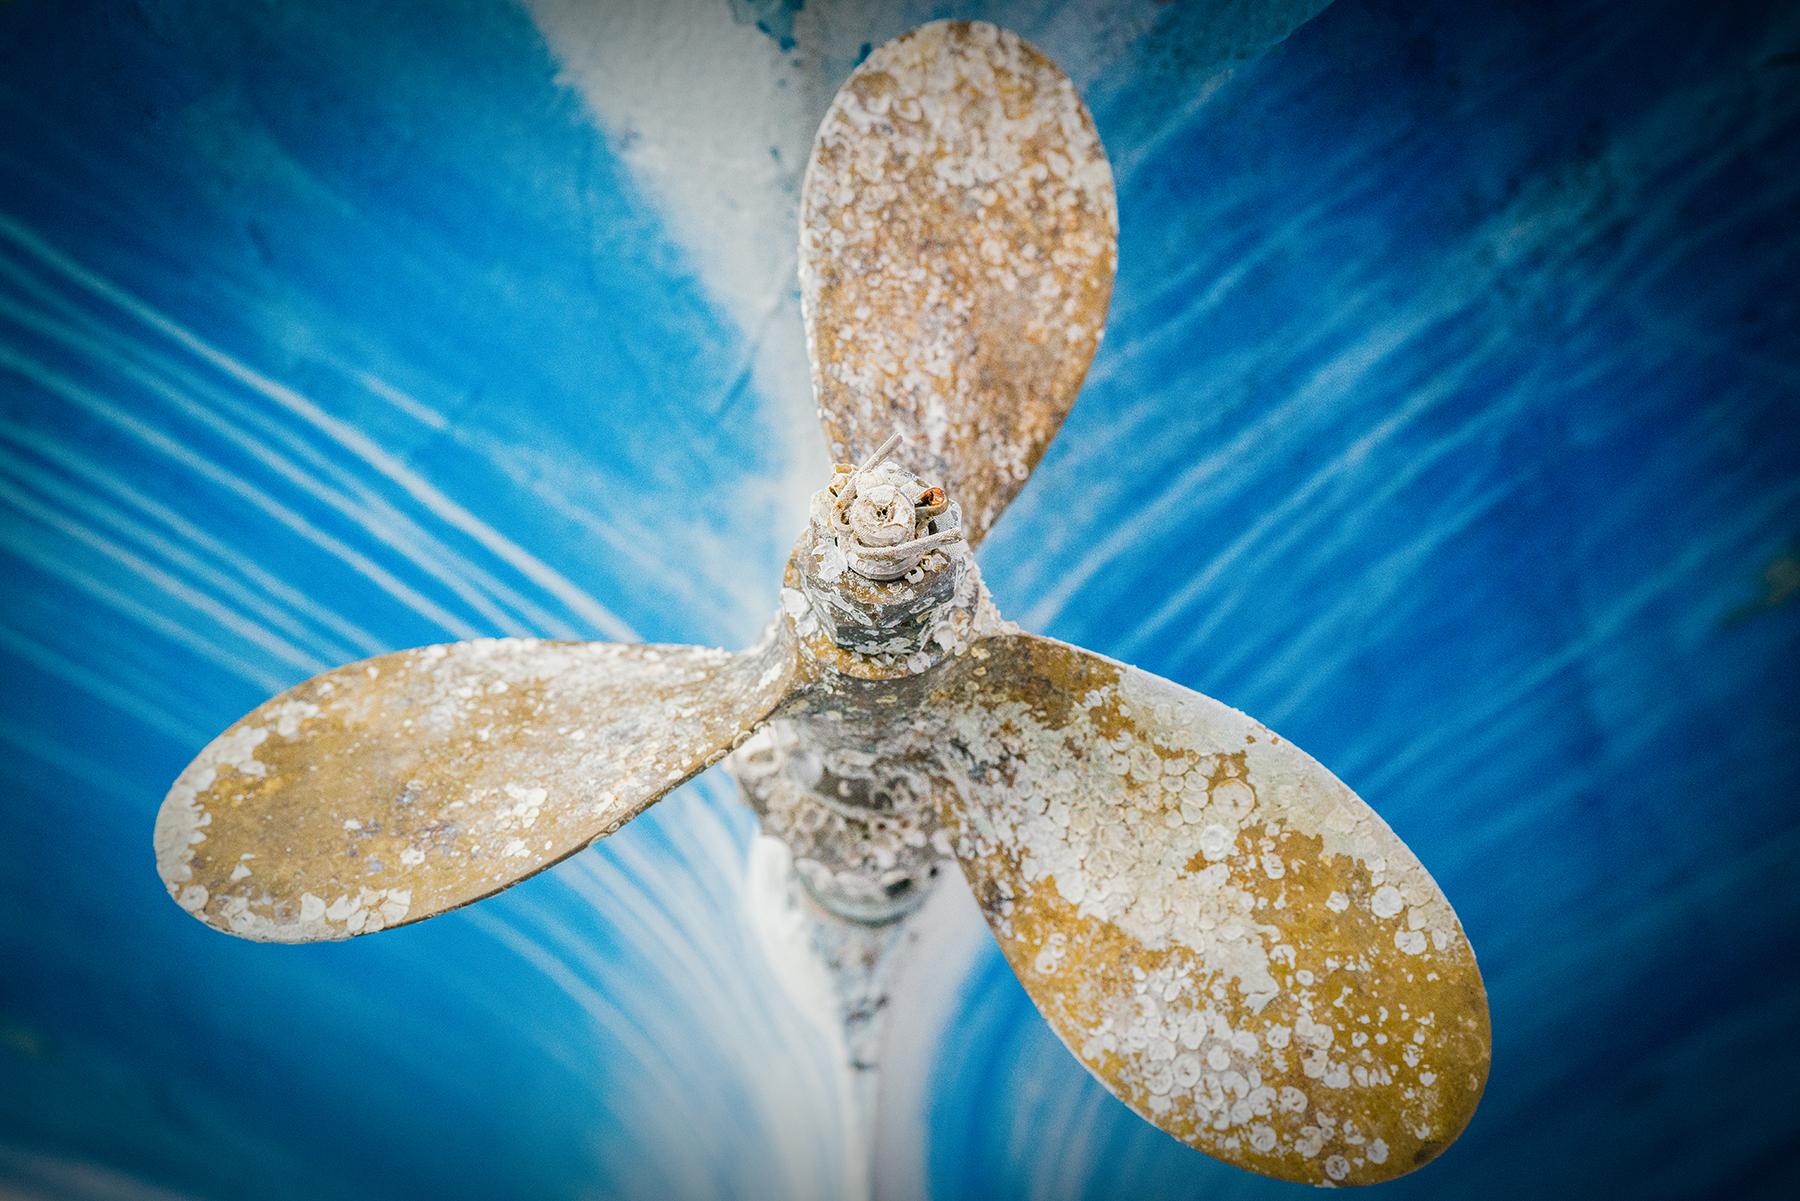 Peter Mendelson Color Photograph - "Corroded Propeller I (Blue), " Contemporary Nautical Photograph, 24" x 36"